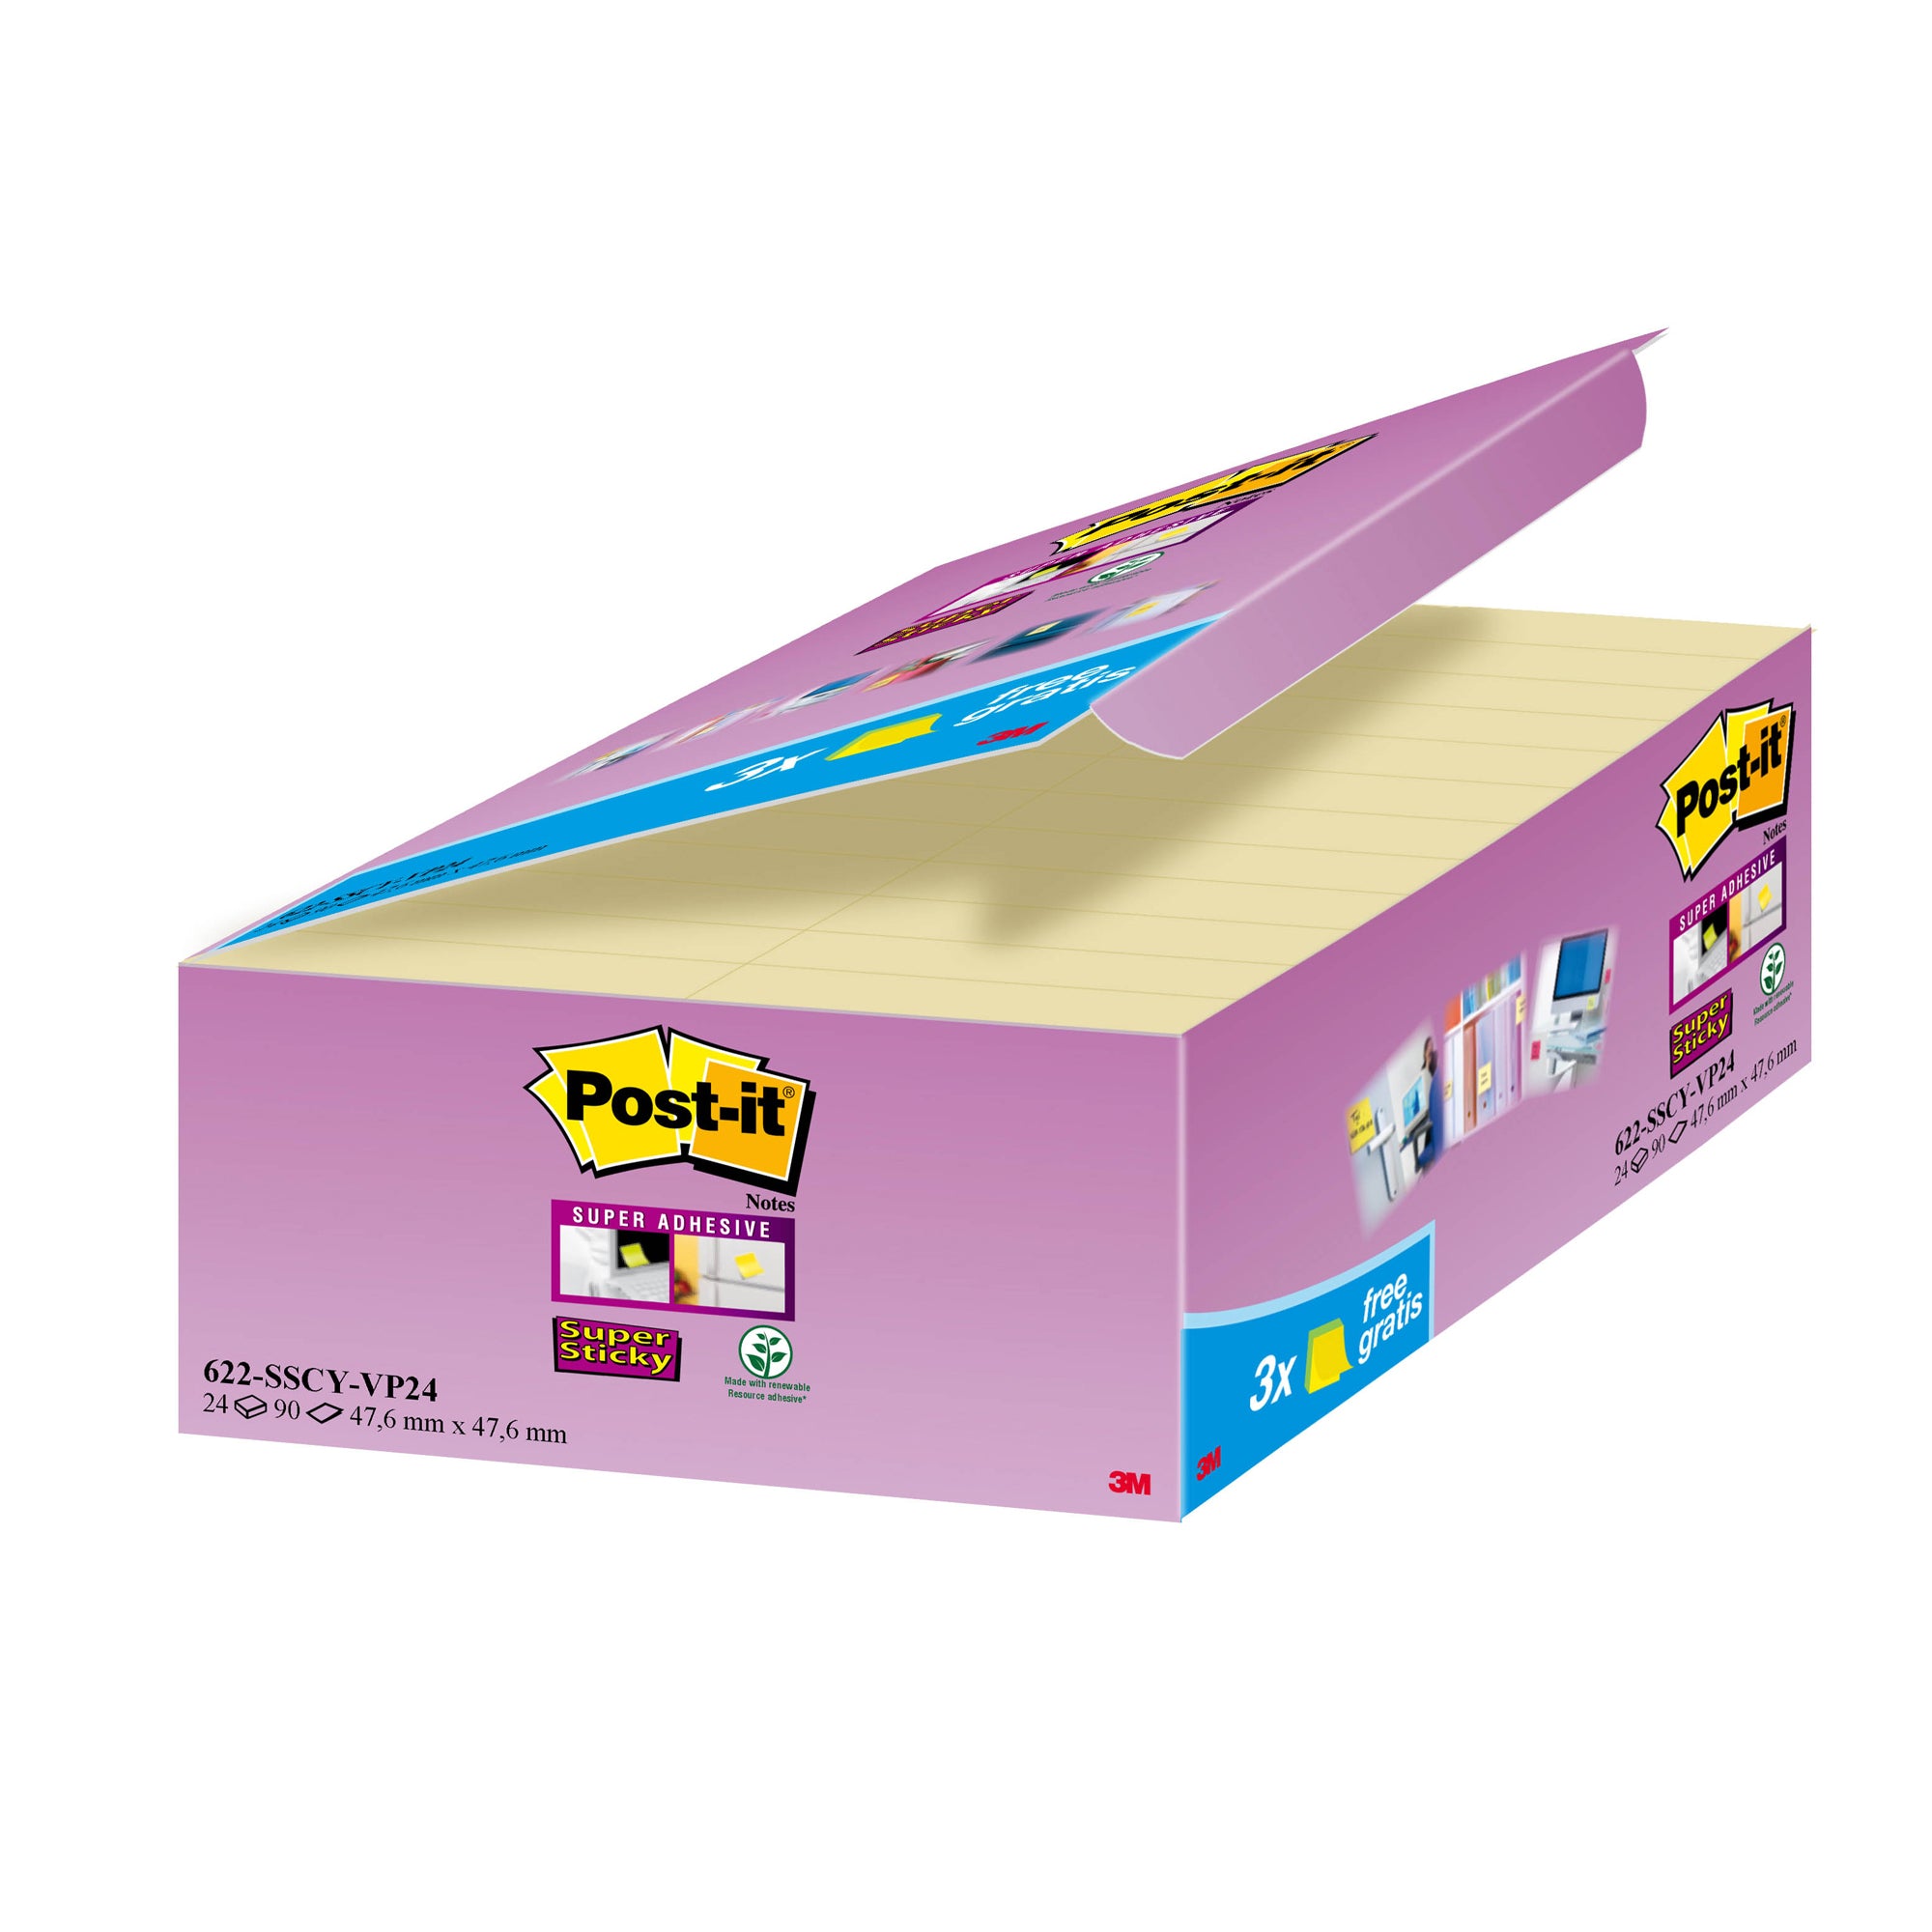 post-it-value-pack-213-blocco-90fg-super-sticky-giallo-canary-47-6x47-6mm